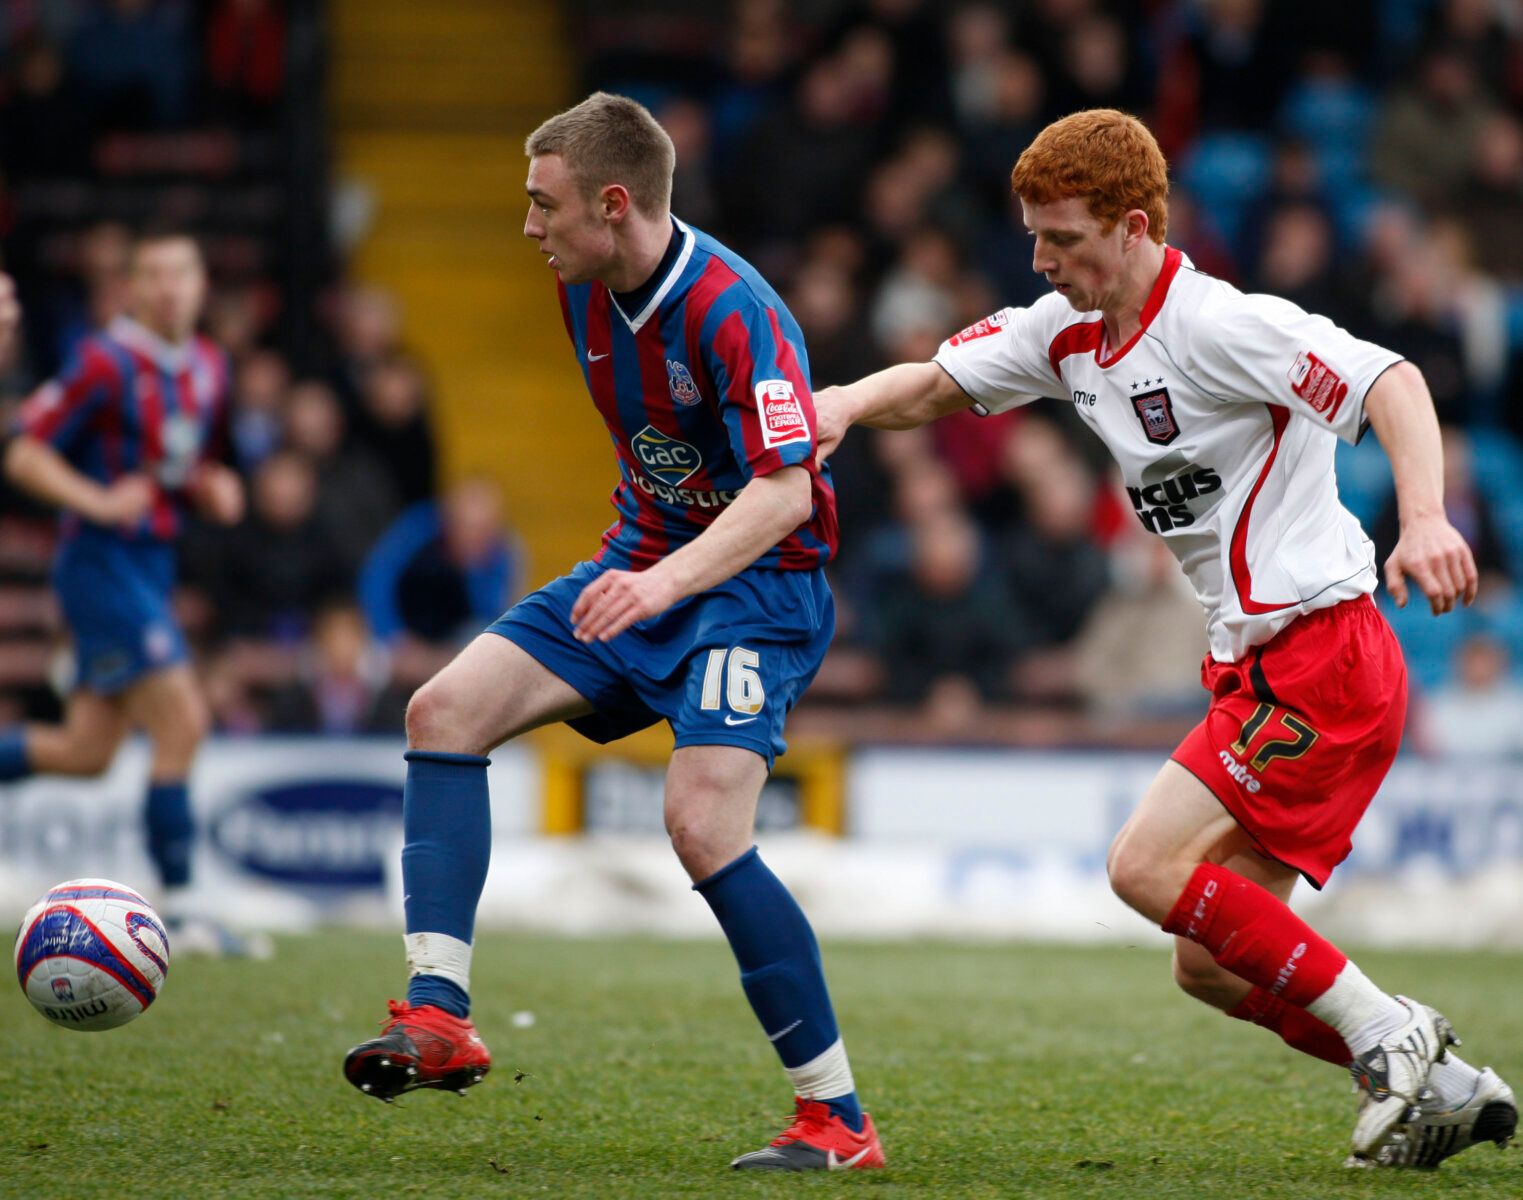 Football - Crystal Palace v Ipswich Town - Coca-Cola Football League Championship - Selhurst Park - 09/10 - 26/12/09 
Freddie Sears (L) - Crystal Palace in action against Jack Colback - Ipswich Town 
Mandatory Credit: Action Images / Steven Paston